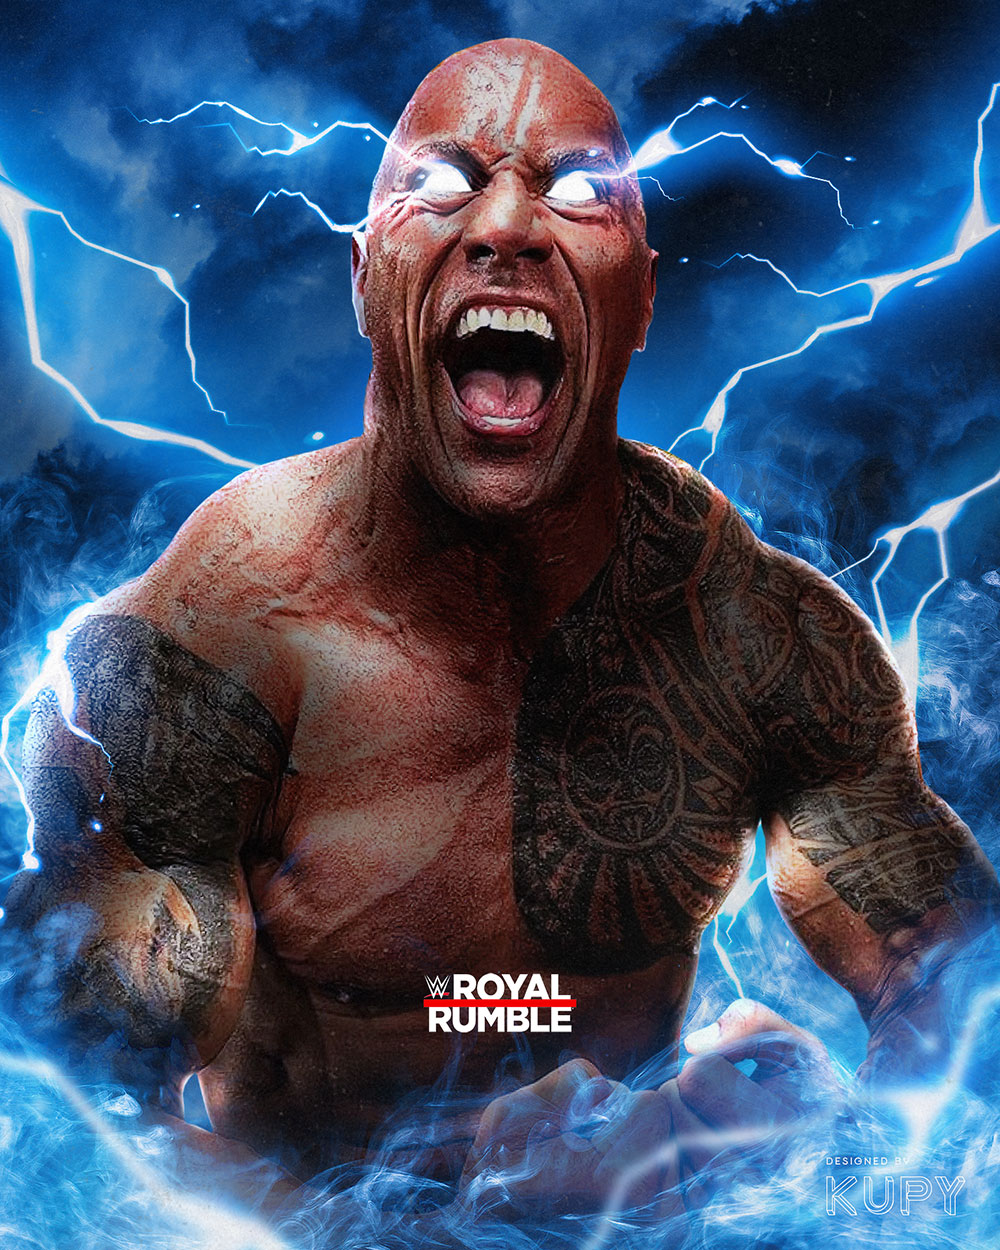 The Rock Archives - Kupy Wrestling Wallpapers